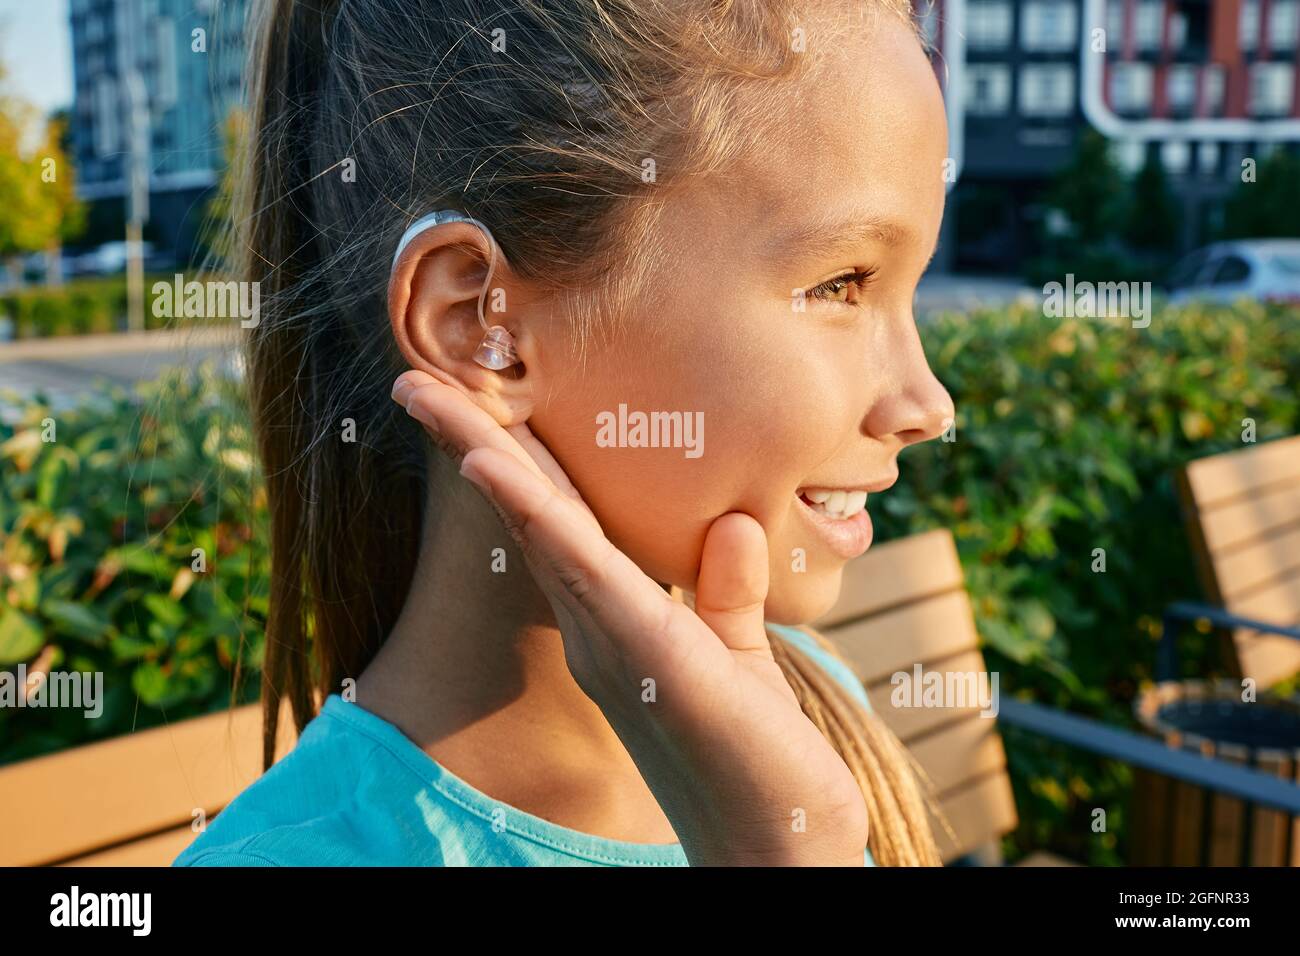 Smiling female child with a hearing aid behind the ear holds hand near her ear for listening environment outdoor, having full life Stock Photo